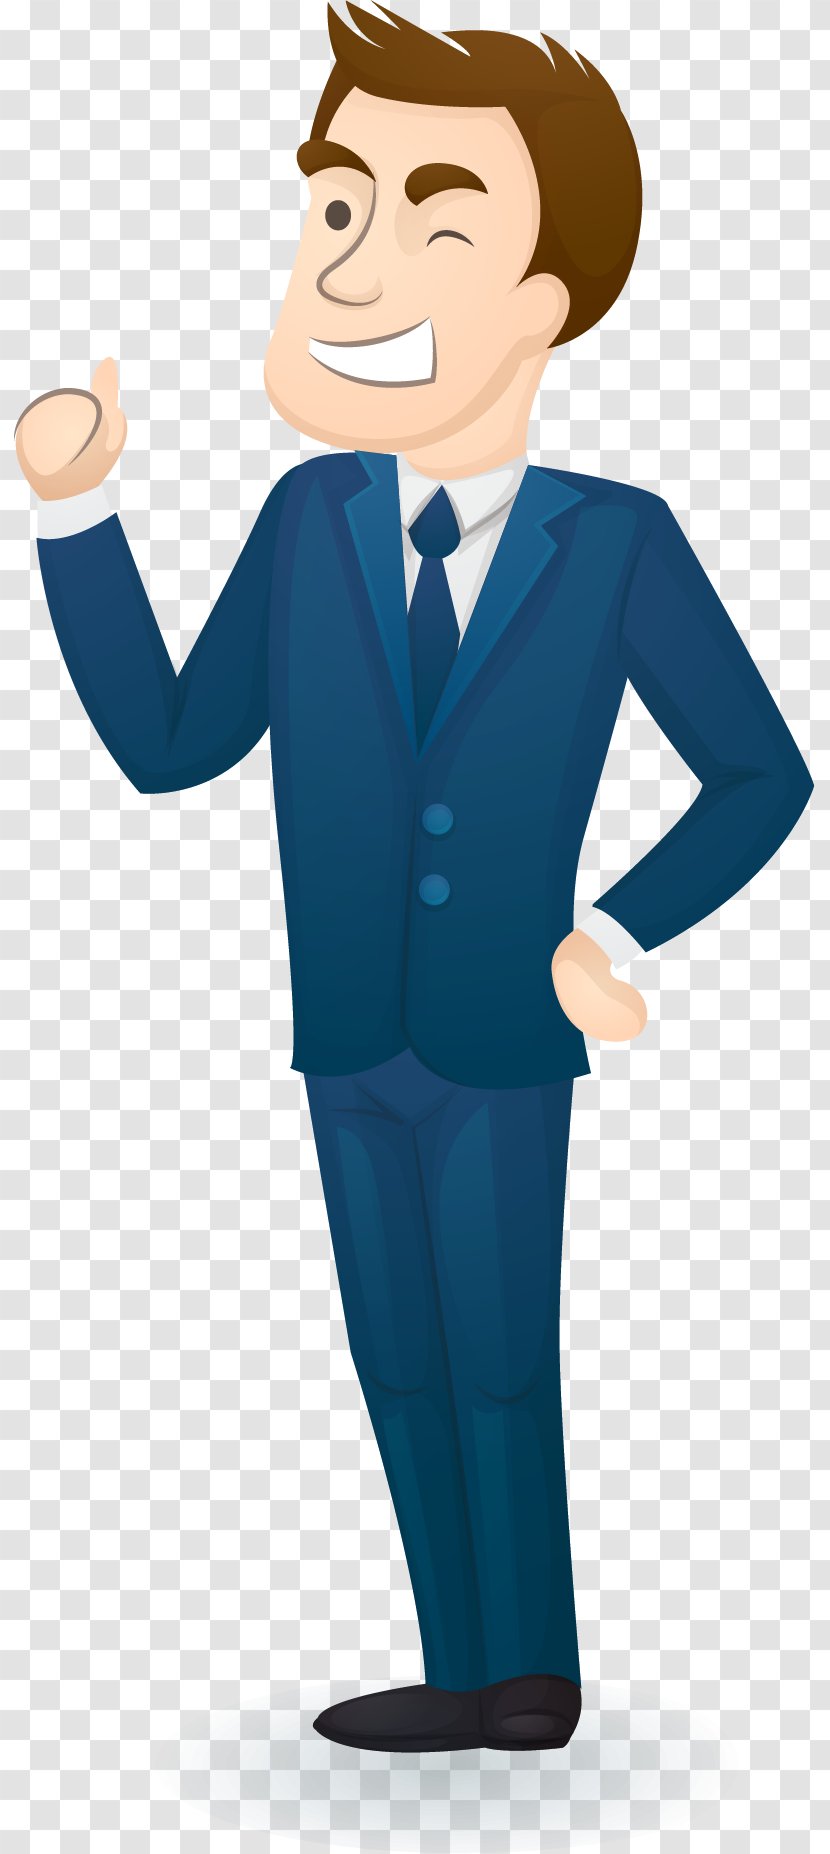 Businessperson Download Company - Job - Point Thumbs Up Business People Transparent PNG